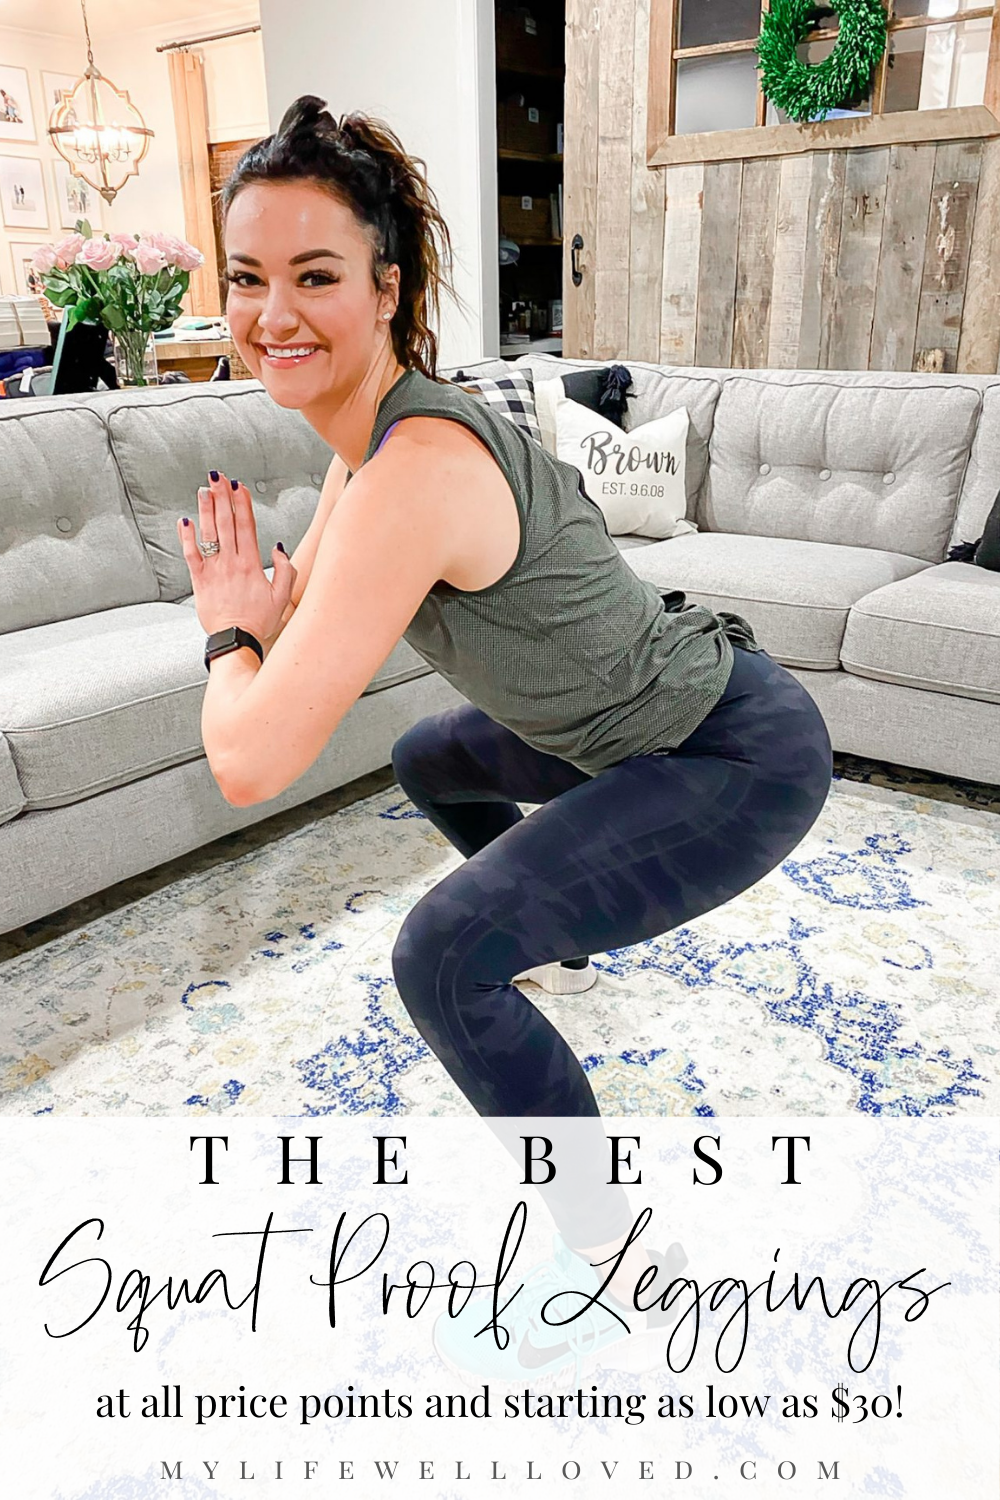 Fitness: Top 16 Best Squat Proof Leggings For Women by Alabama Fitness + Fashion blogger, Heather Brown // My Life Well Loved